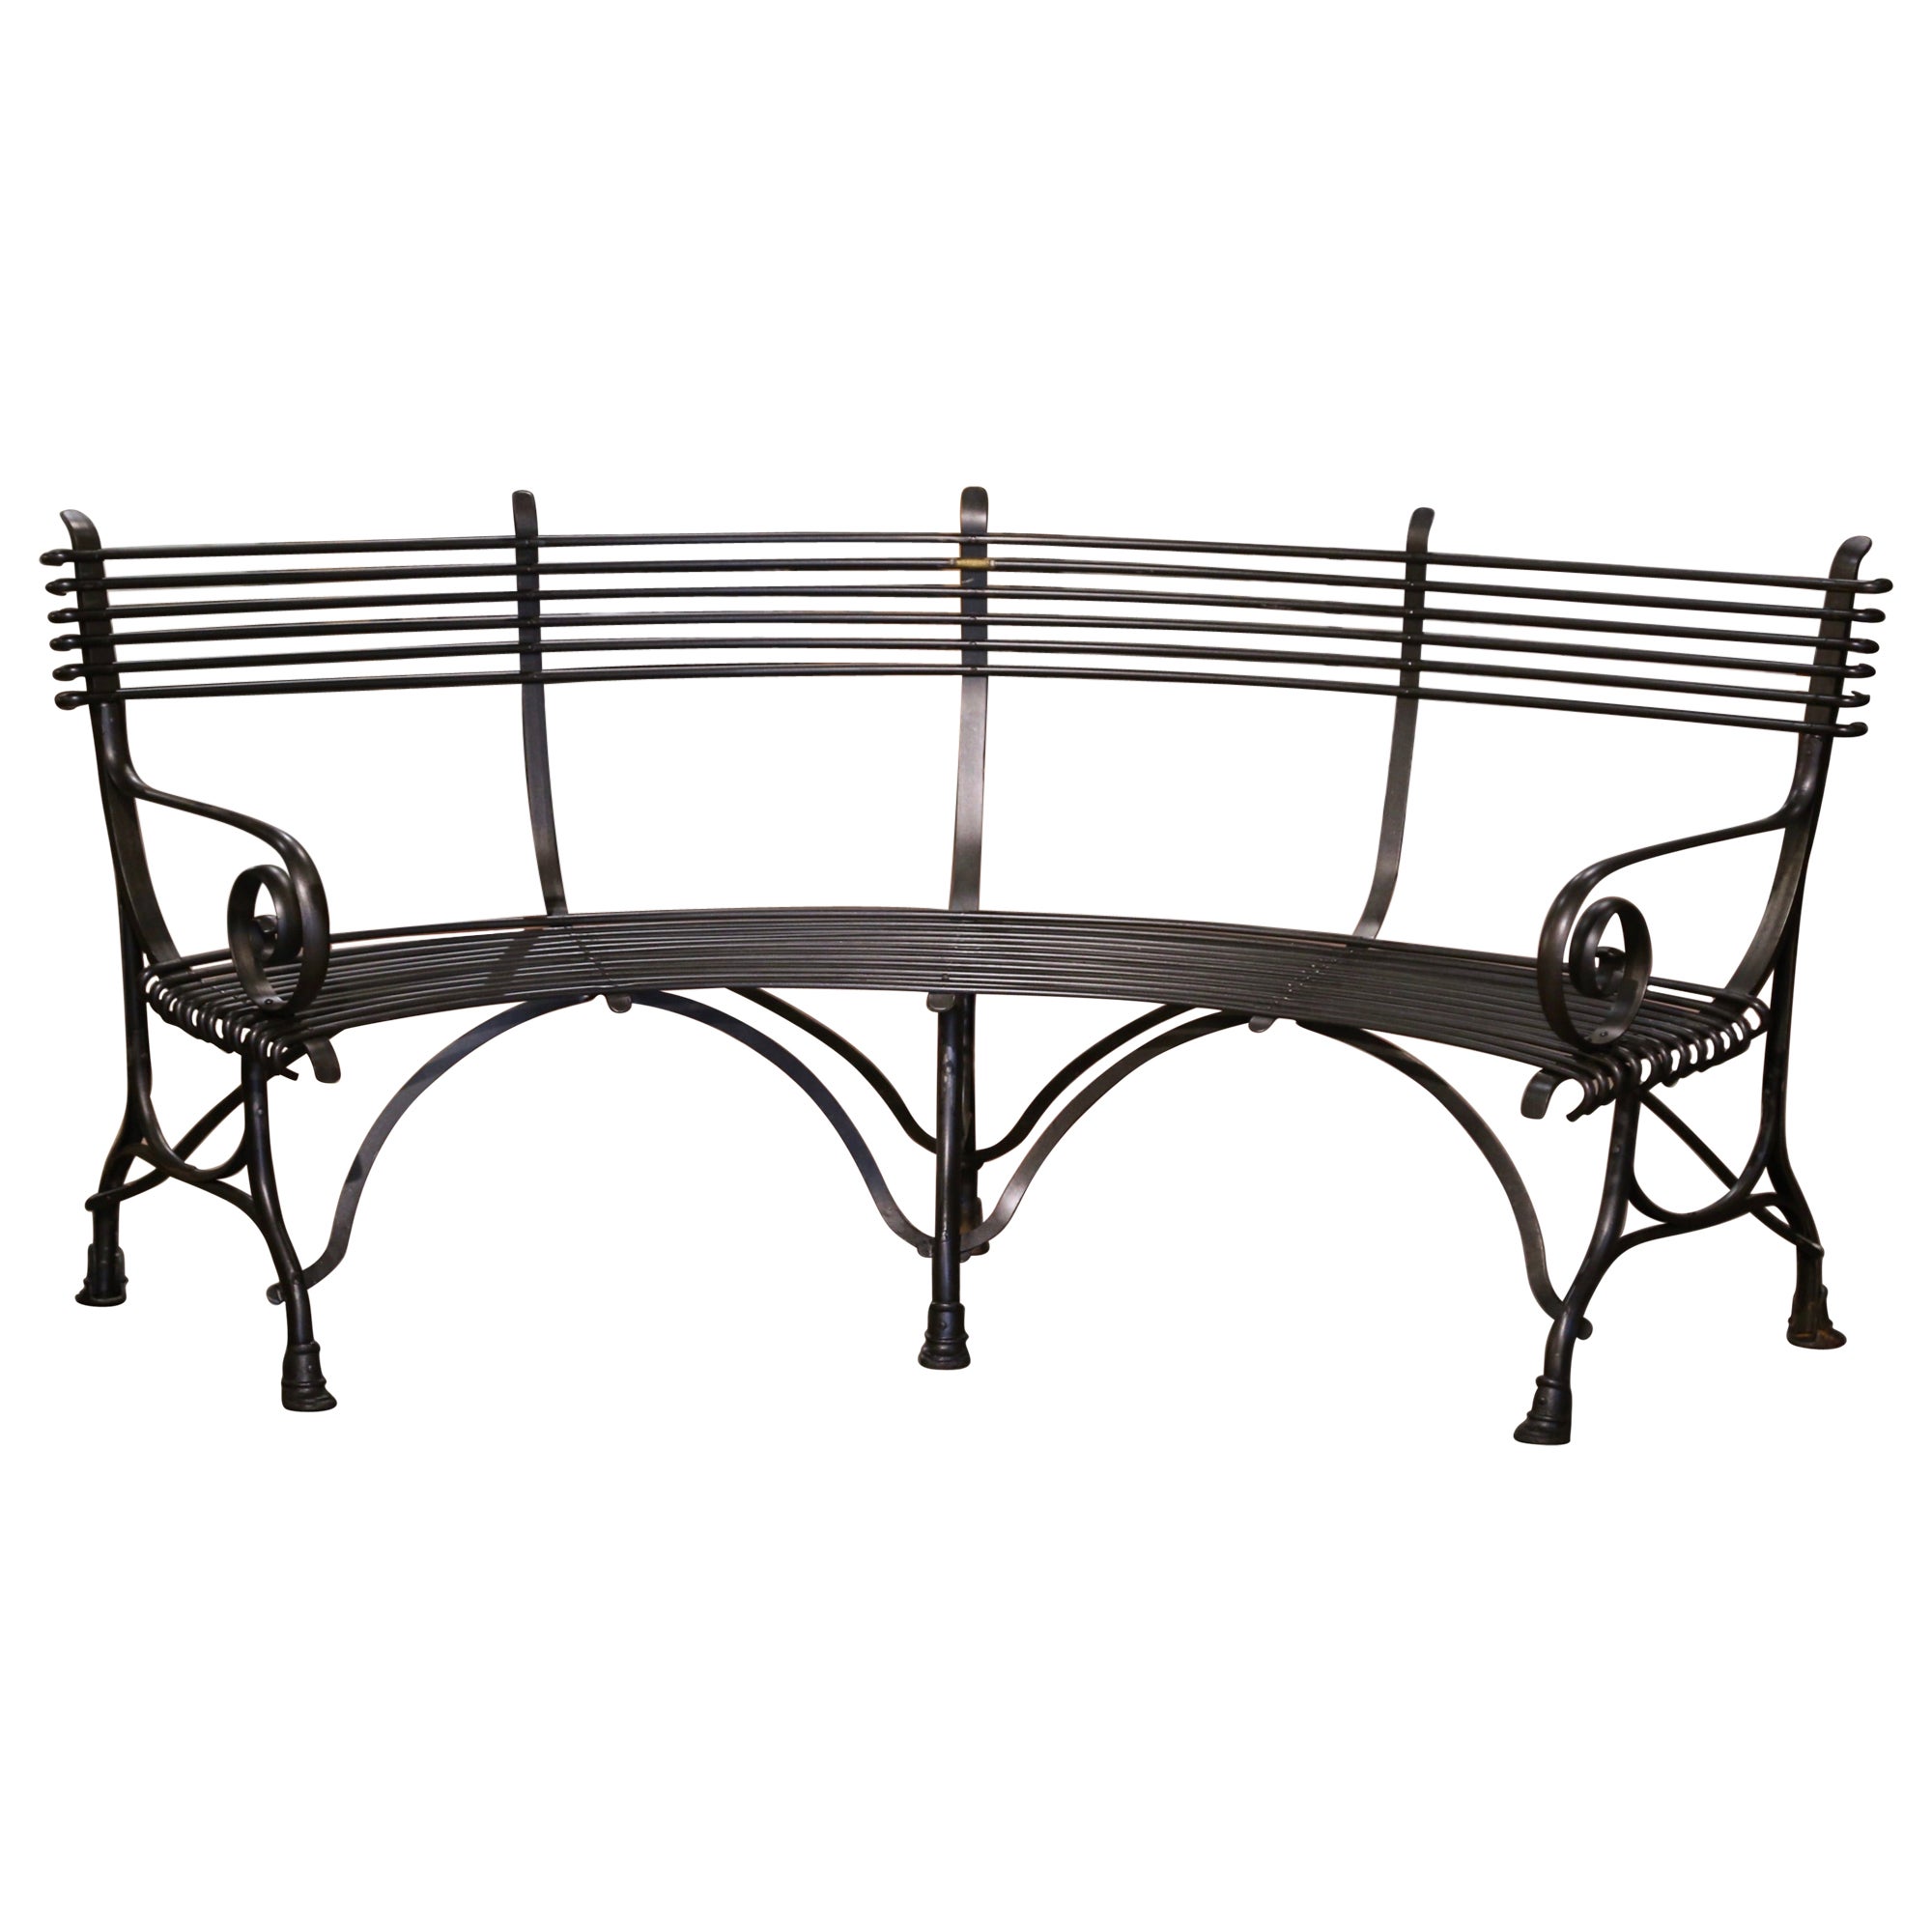 French Curved Iron Four-Seat Bench Signed "Sauveur Arras" For Sale